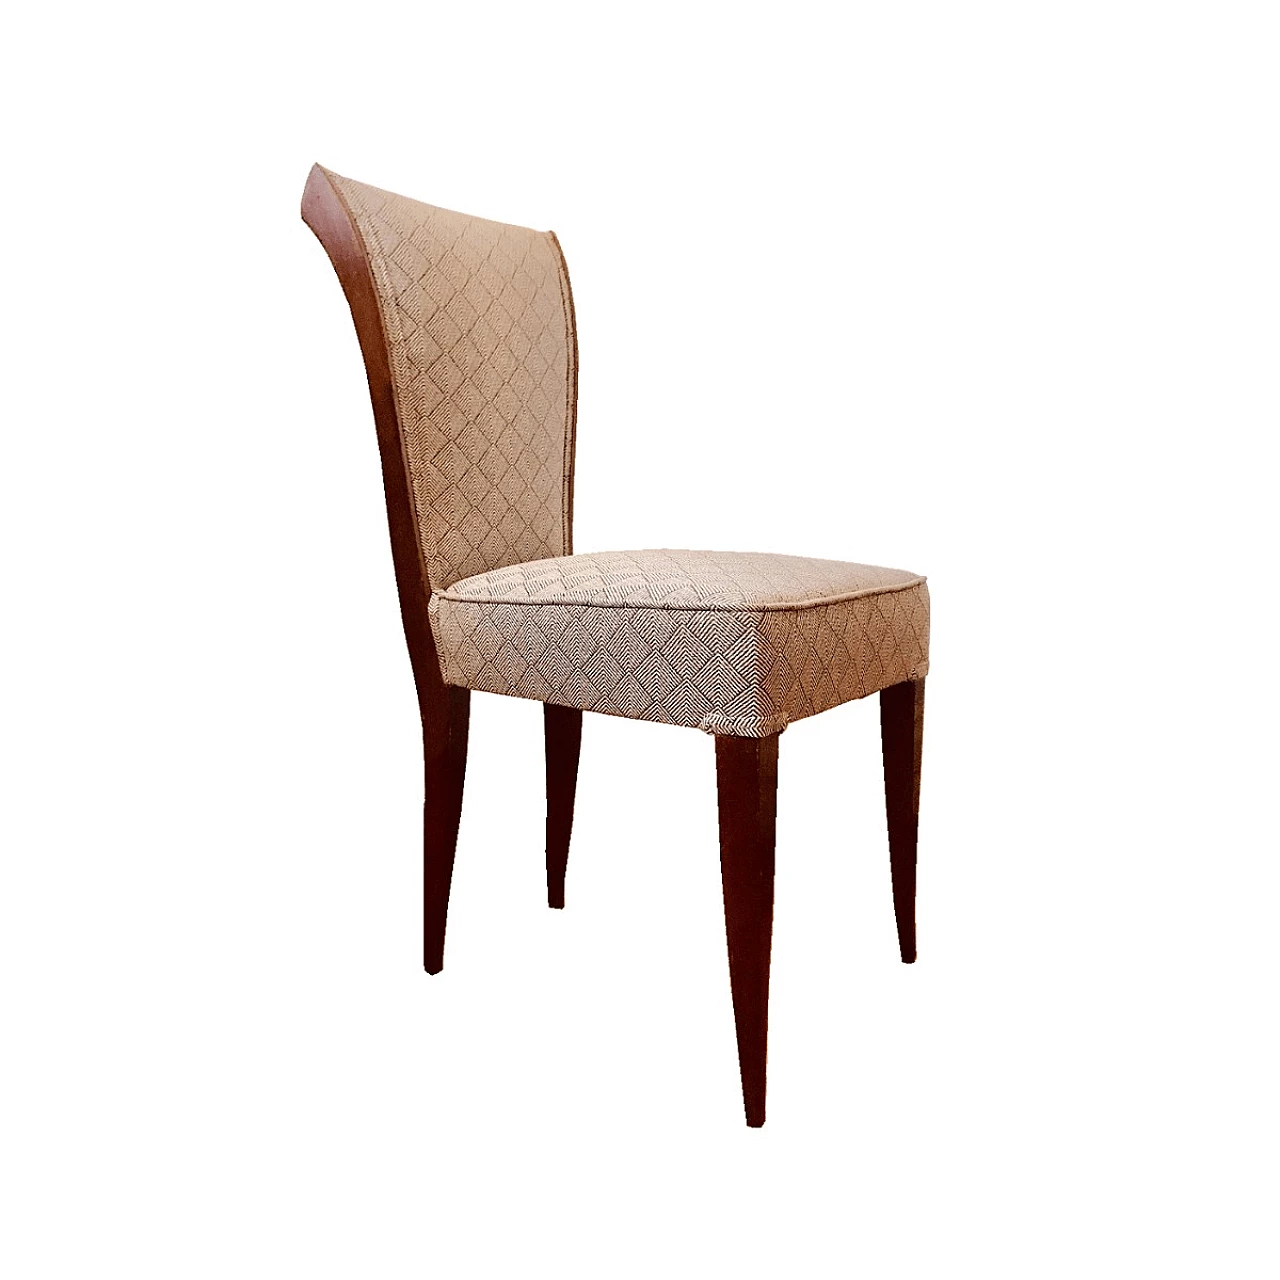 Upholstered chair 1061222